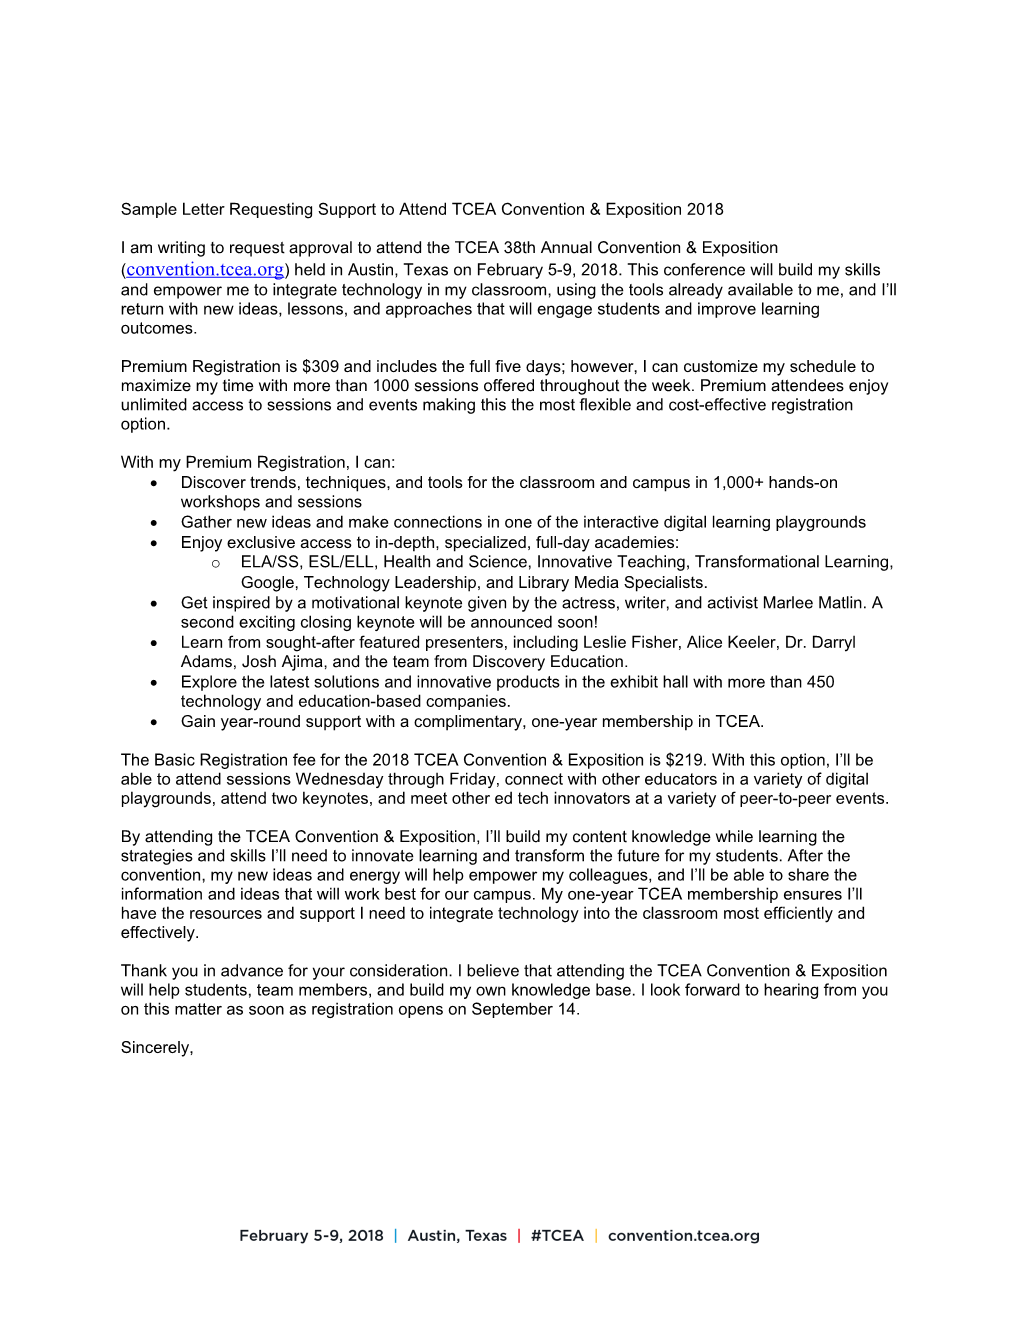 Sample Memo: Requesting Employer Support